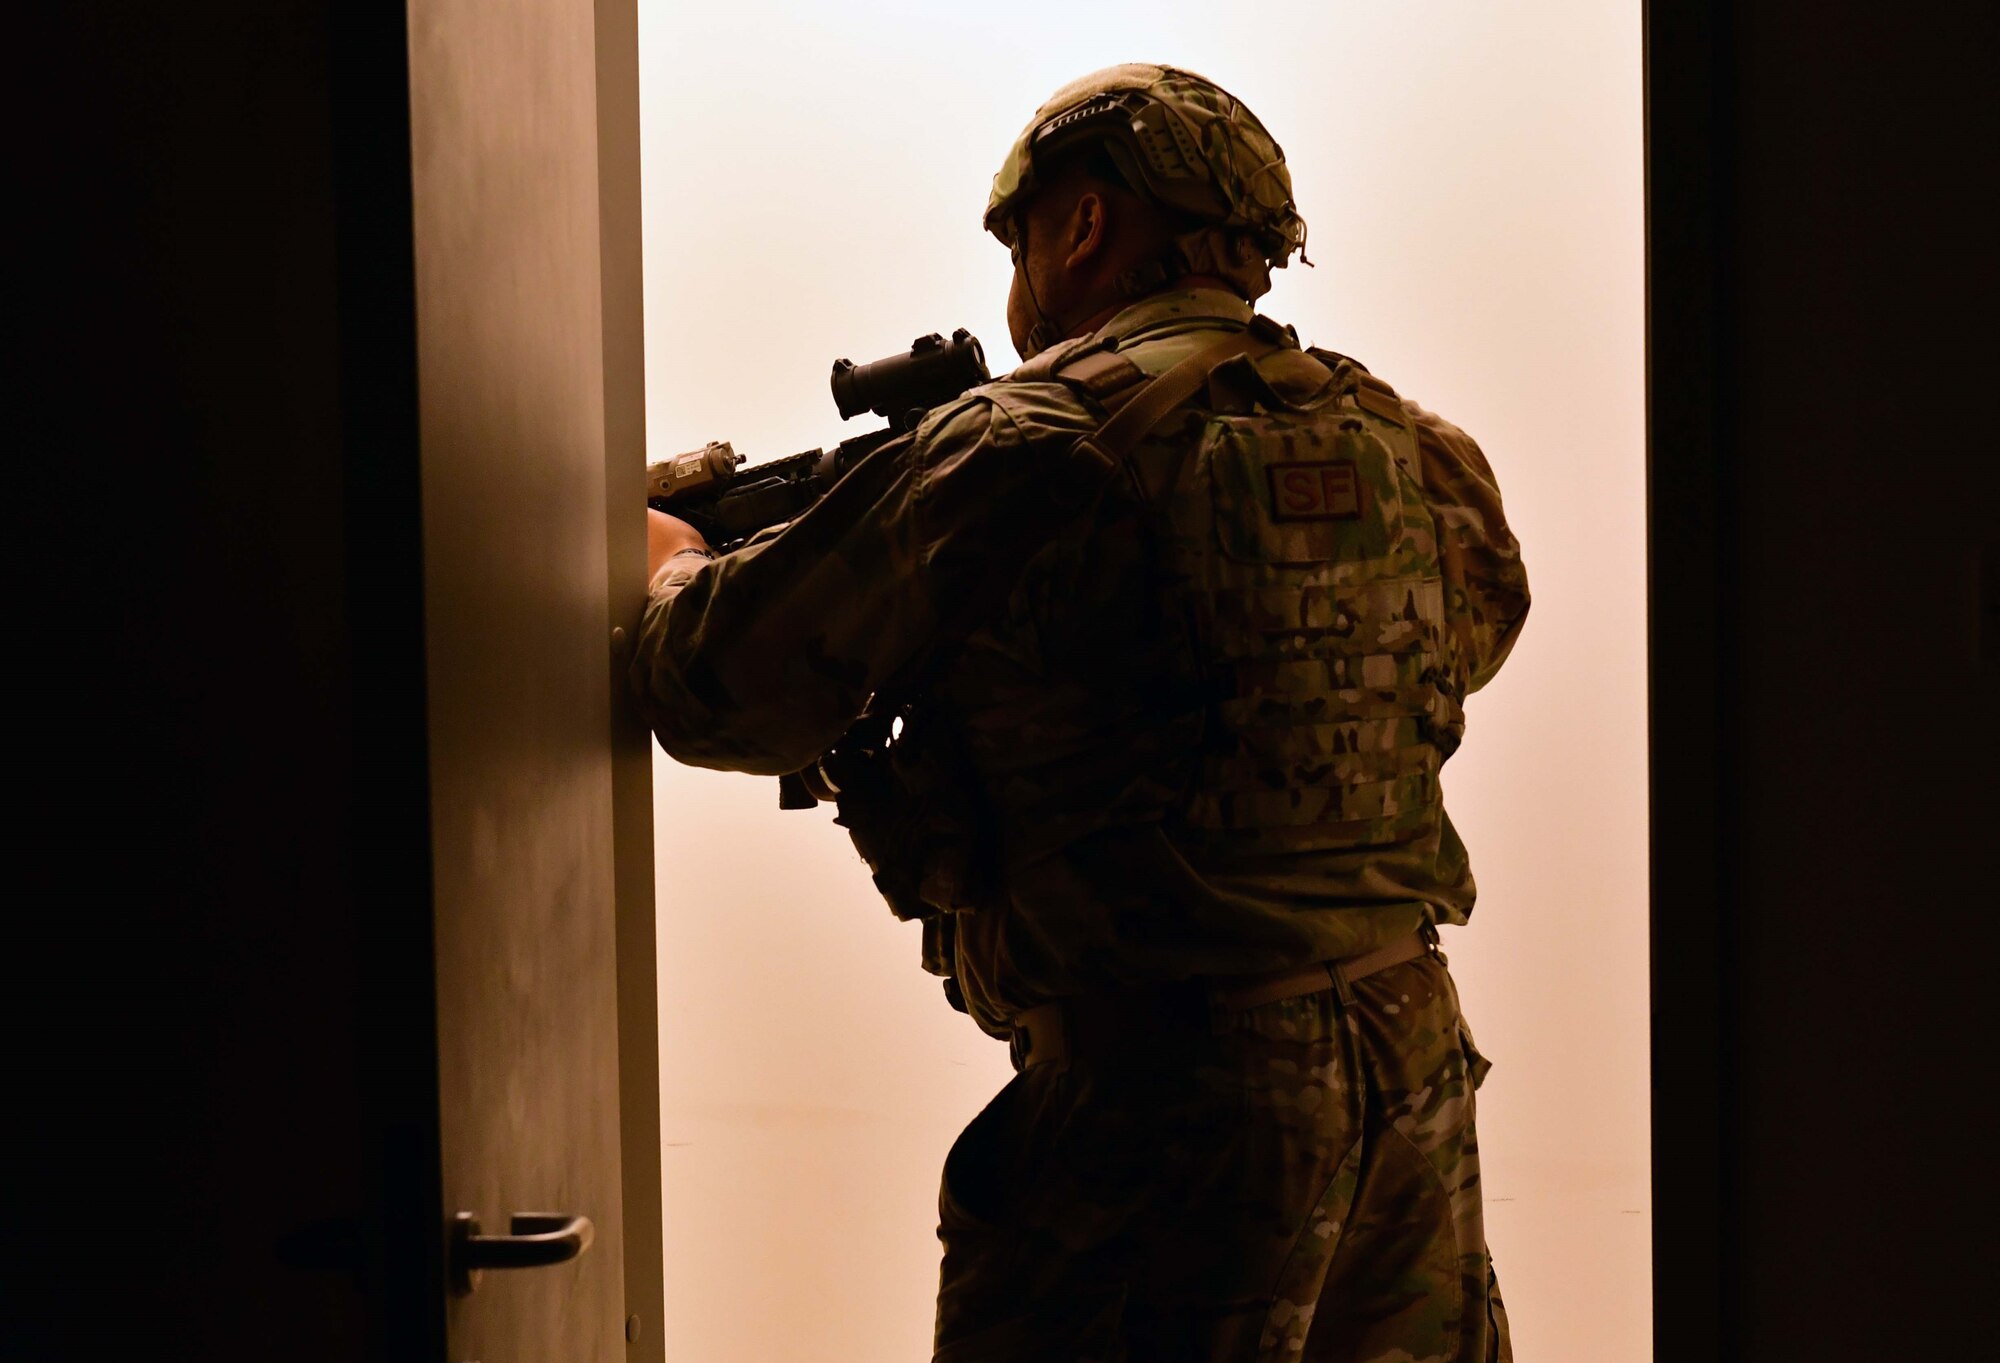 Airmen from the 332d Air Expeditionary Wing Security Forces Squadron participated in an active shooter operations rehearsal at an undisclosed location in Southwest Asia, Jan. 31, 2023.  The rehearsal served as training for a possible real world scenario where either an insider or outsider threat may occur.